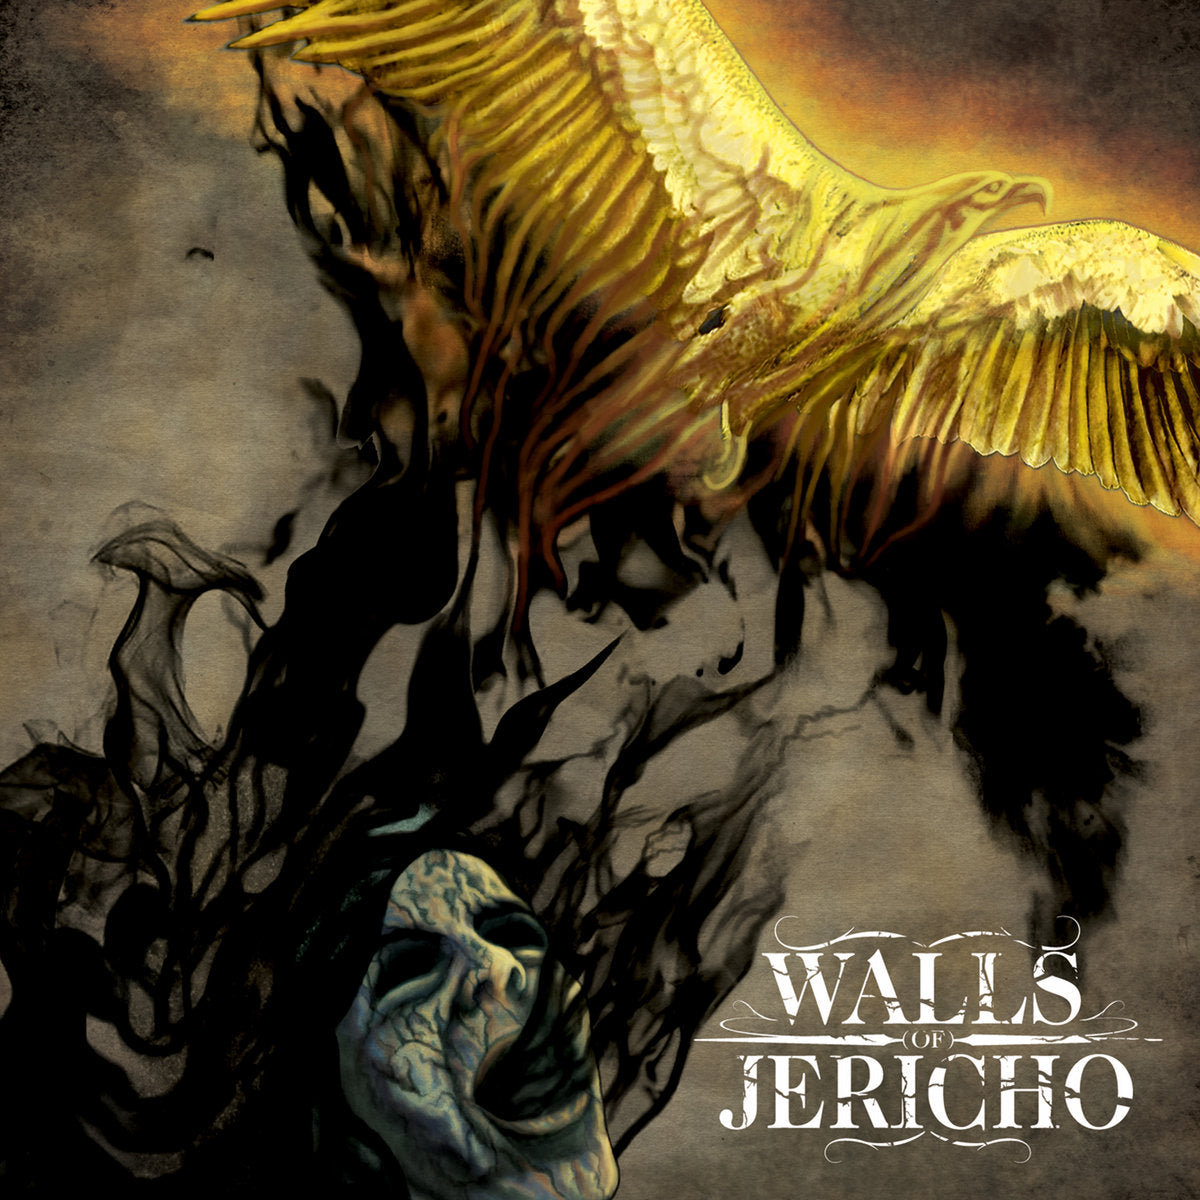 Walls of Jericho "Redemption" CD